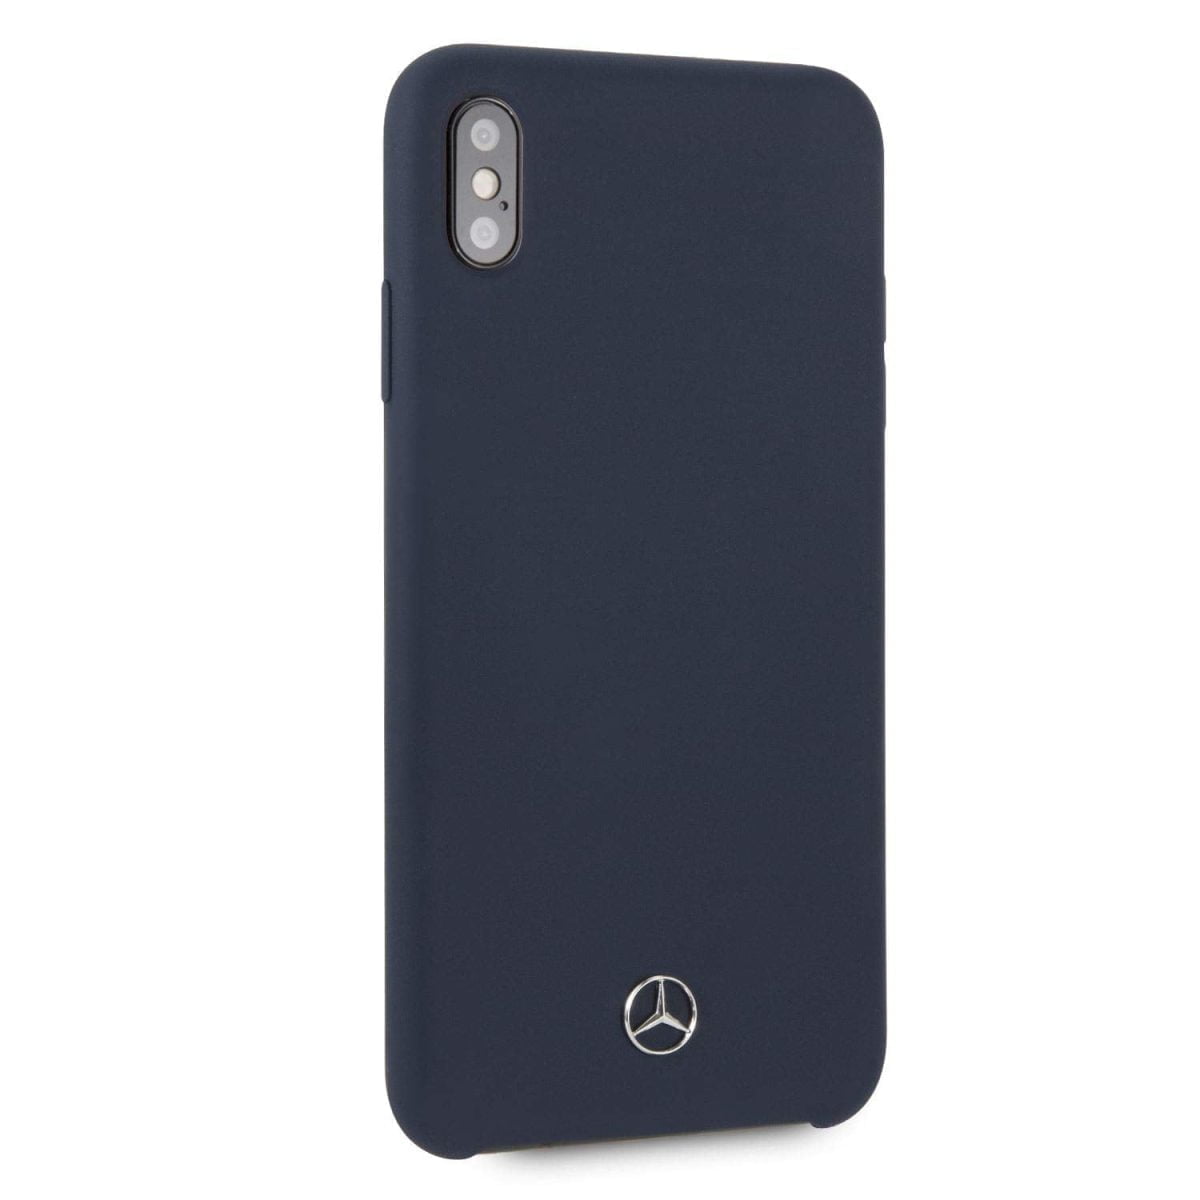 Mercedes Benz Iphone Xs Max Liquid Silicon Silcon Case With Microfiber Lining Navy 06 This Hard Silicone Soft Case With A Sculpted Metallic Mercedes Benz Logo For A 3D Effect Gives You A Classic And Elegant Appeal To Your Handheld Device It Has Easy Accessibility For All Ports And Buttons. Case Compatible With Wireless Chargers. Soft Microfiber Interior, Easy To Hold &Amp; Easy Snap-On Design Makes It Fast And Easy To Install Or Take Off In Seconds This Case Provides Both The Ultimate Luxury Experience And Protection From Scratches And Abrasions By Slightly Raised Edges Iphone Silicon Case Iphone Xs Max Liquid Silicon - Silicon Case With Microfiber Lining (Navy Blue) Mercedes-Benz